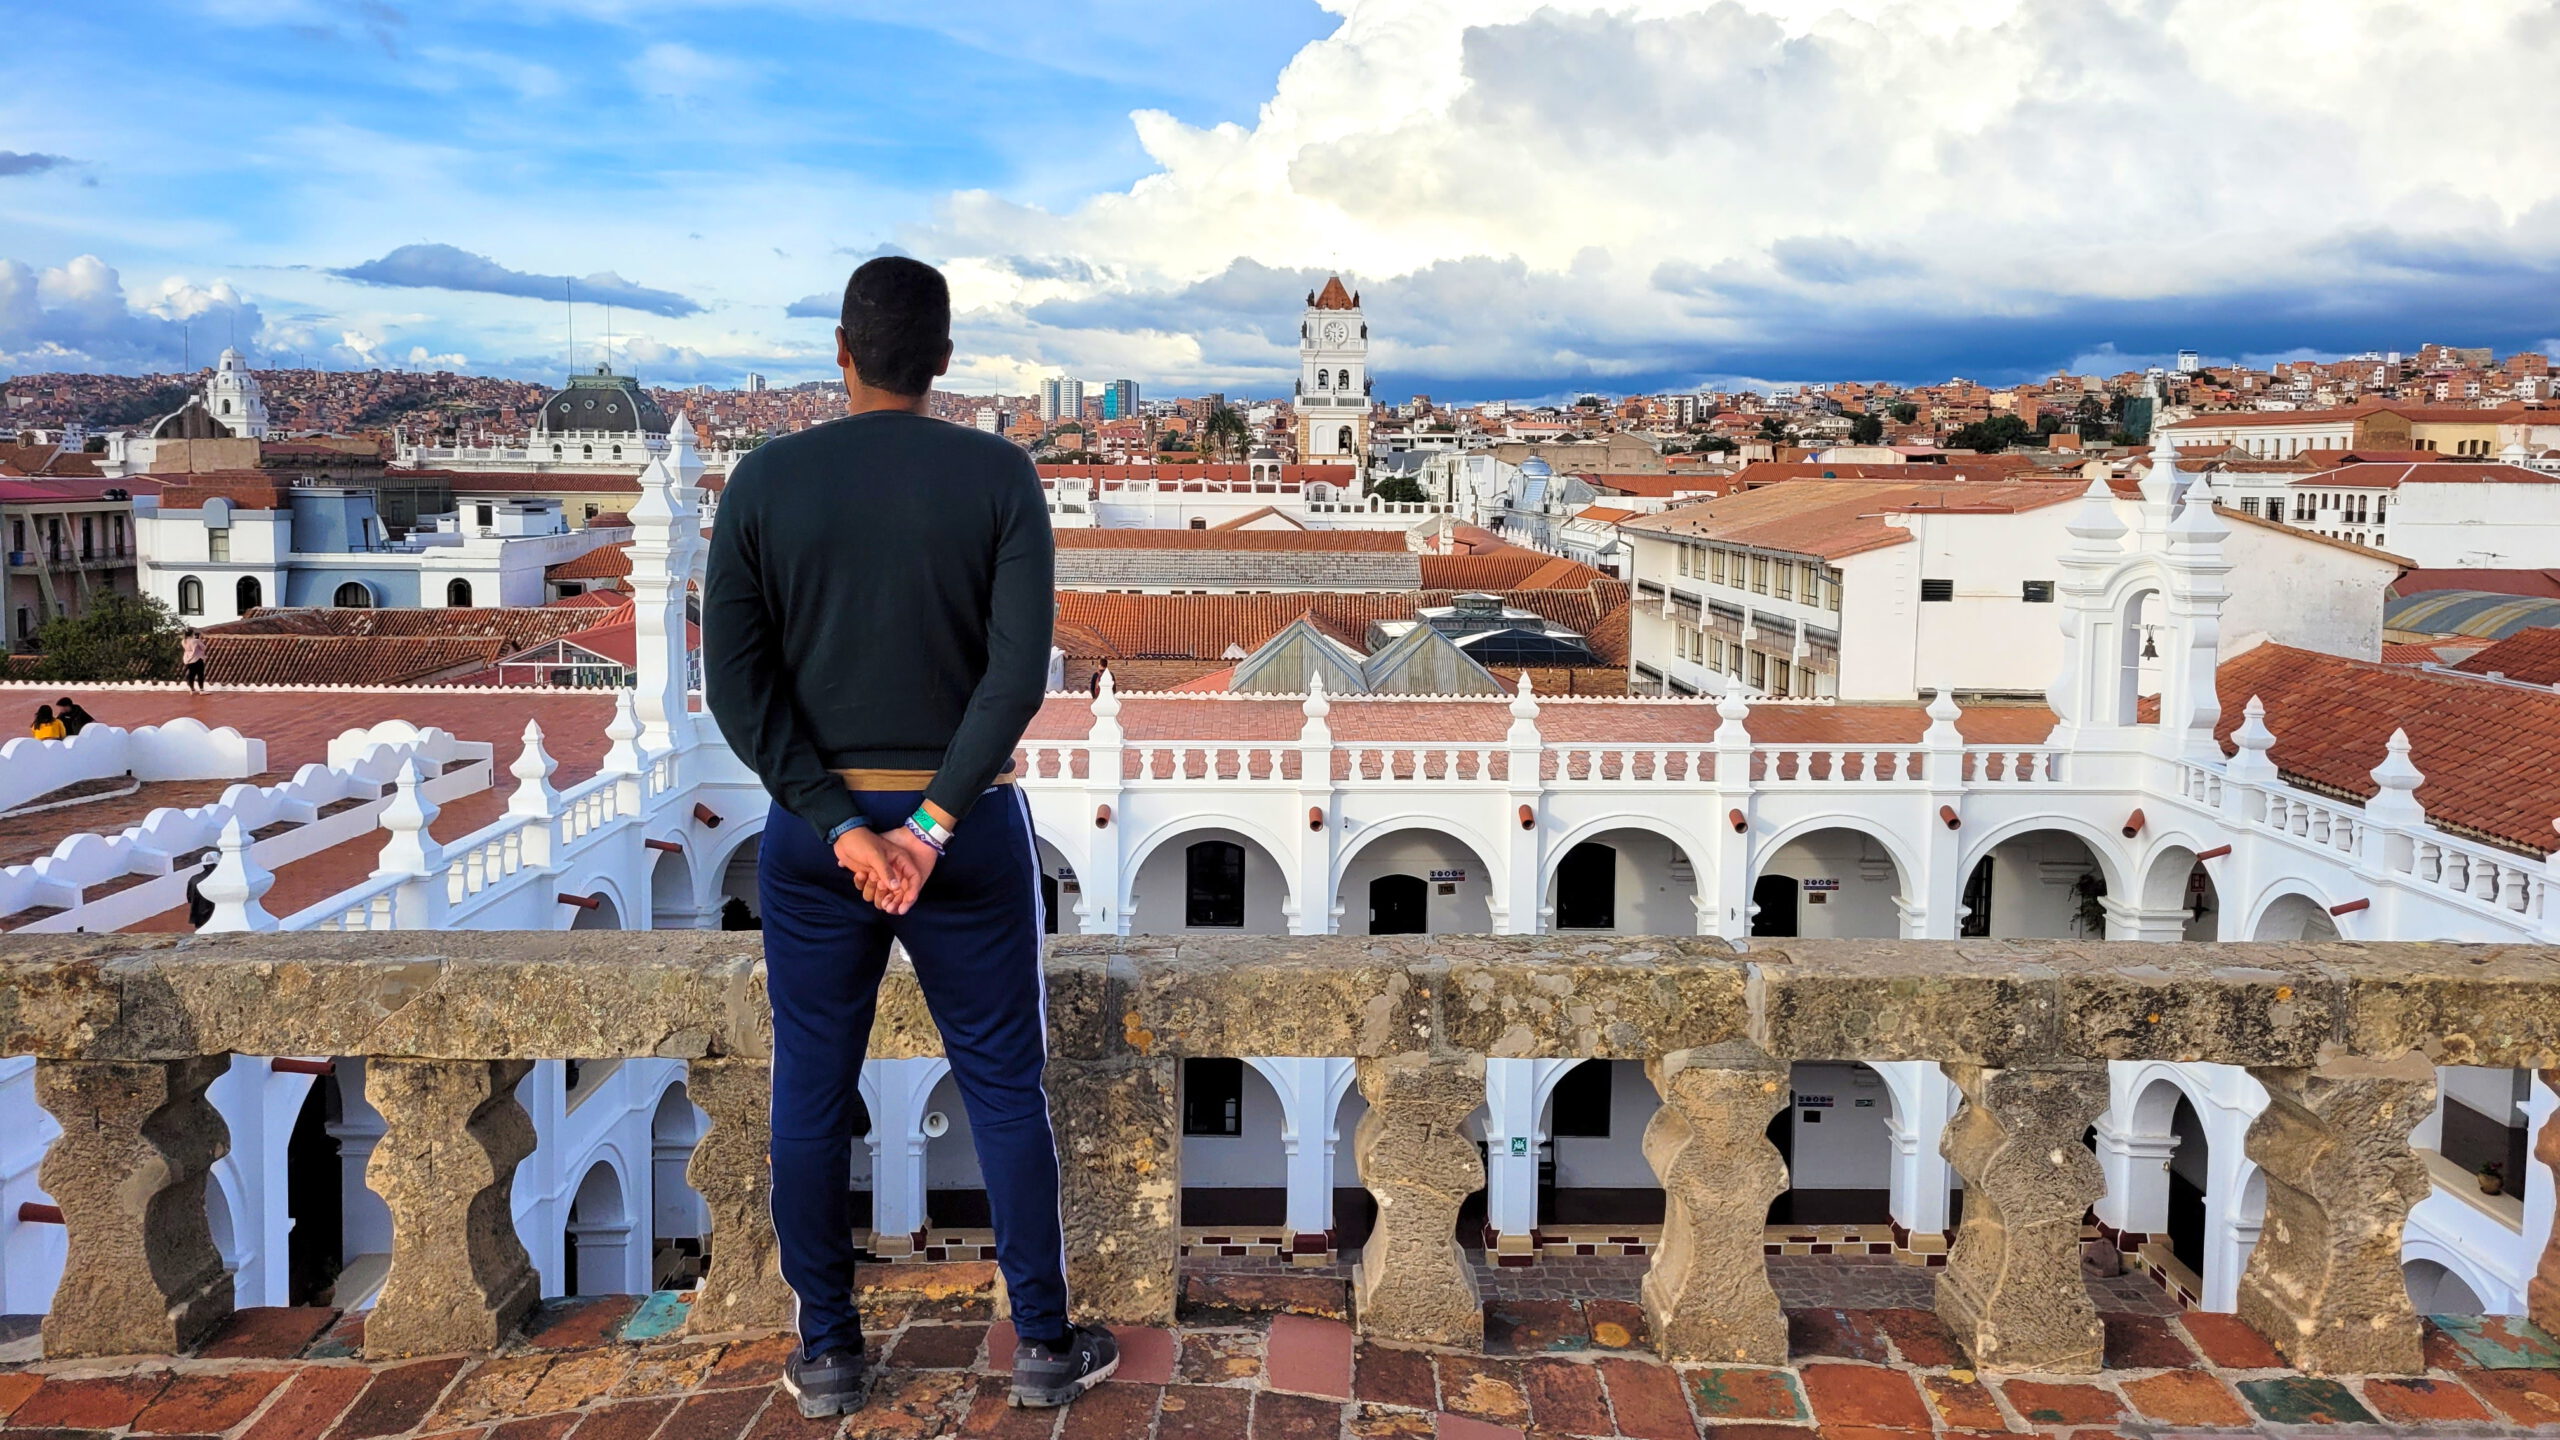 7 things to do in Sucre